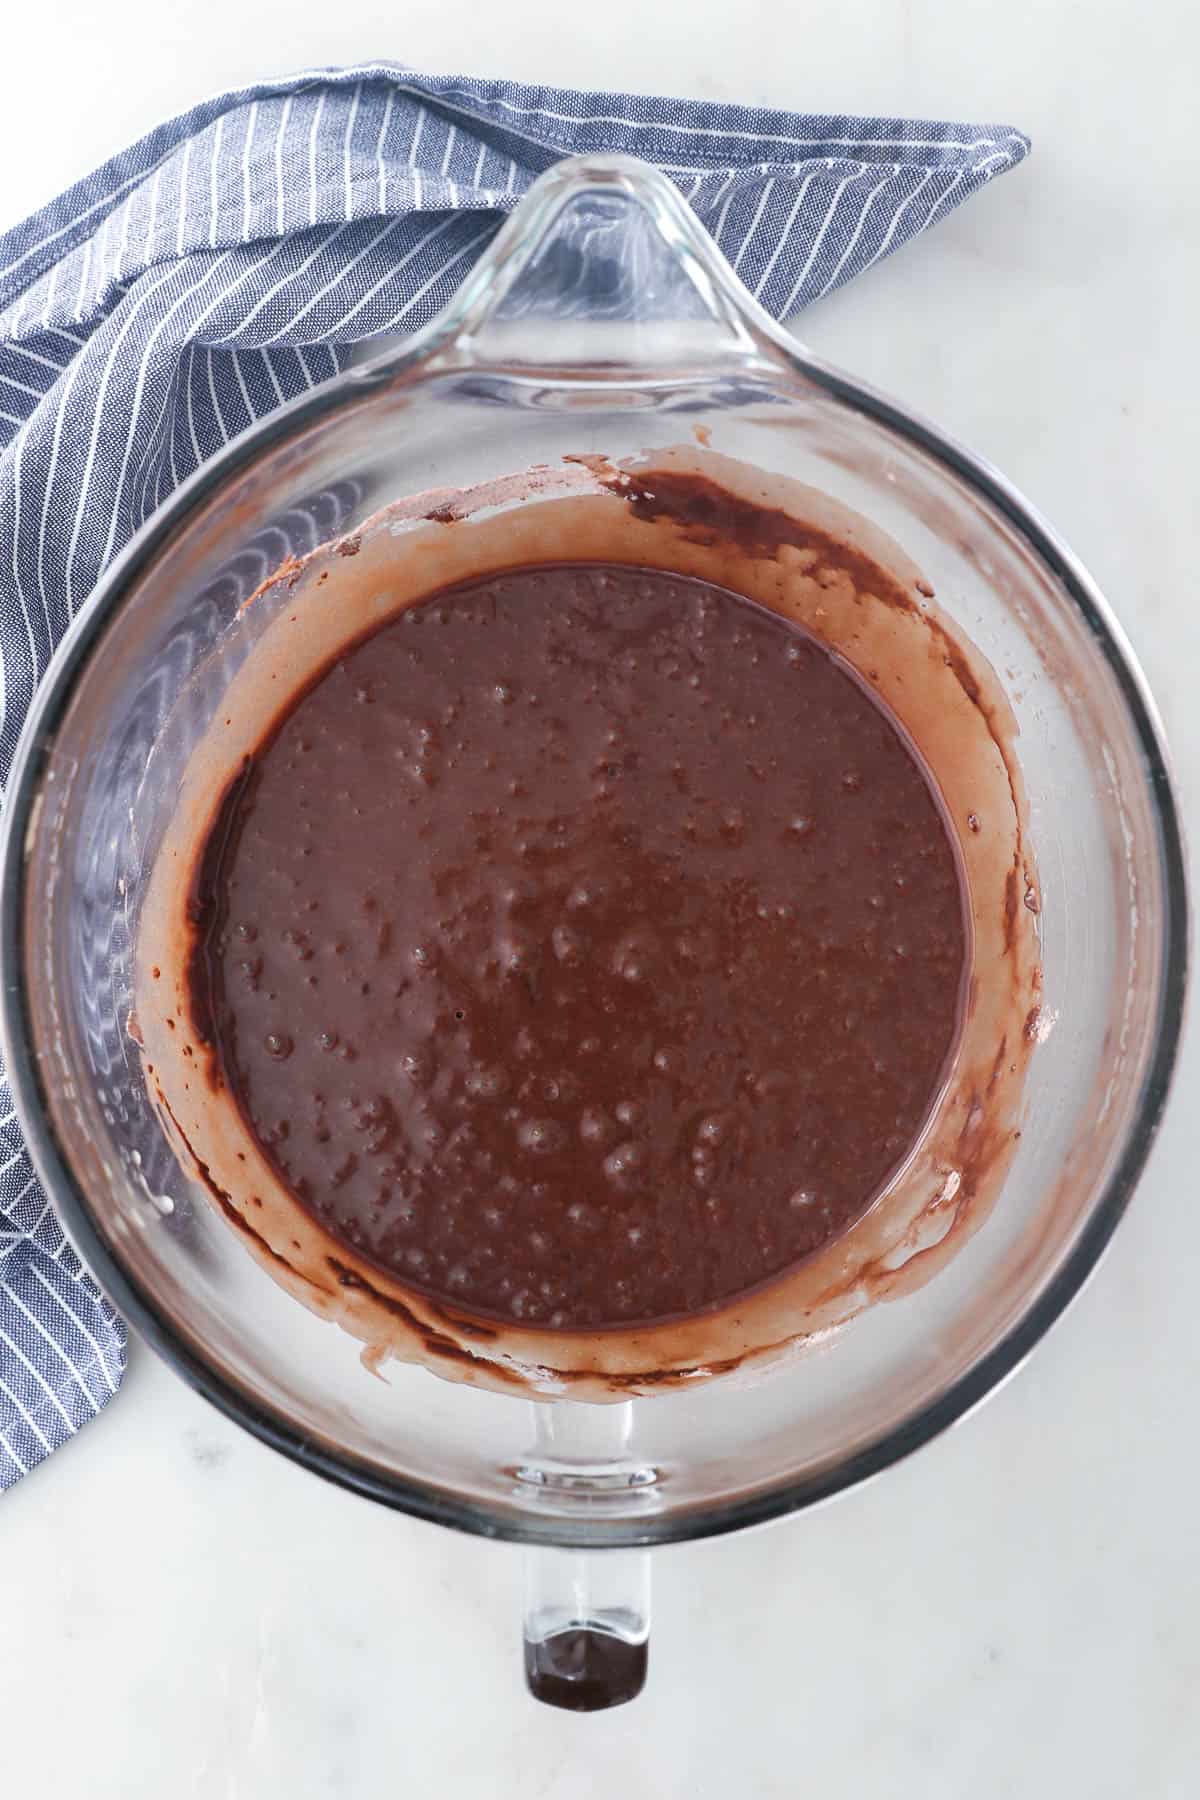 Chocolate rum cake batter in a glass mixing bowl.